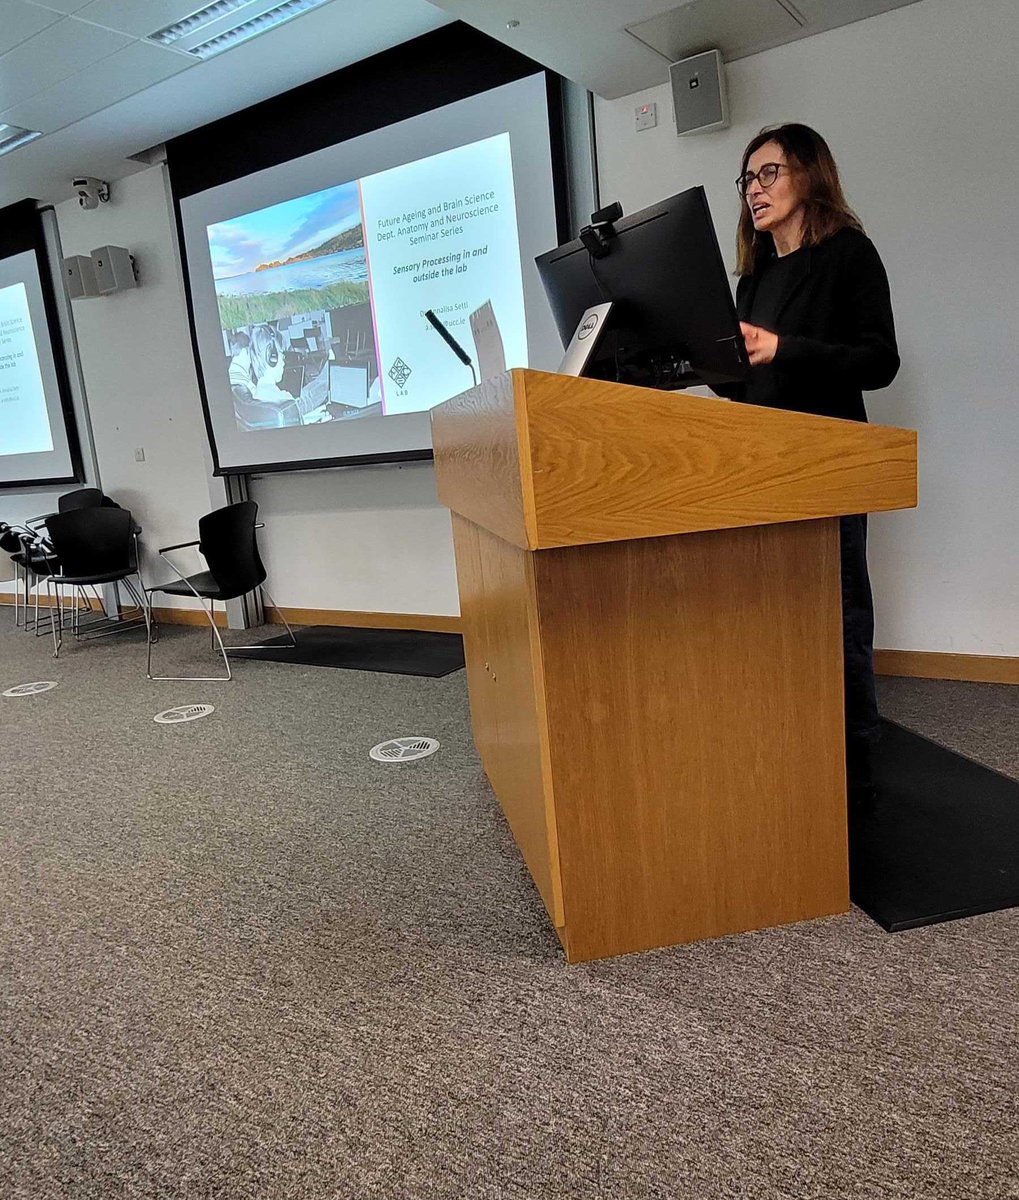 It was great to have @annalisa_setti speak at our @UCC futures seminar today where she told us all about sound-induced flash illusion and its role in predicting falls in the elderly. @AppPsychUCC @UCCResearch #Futures